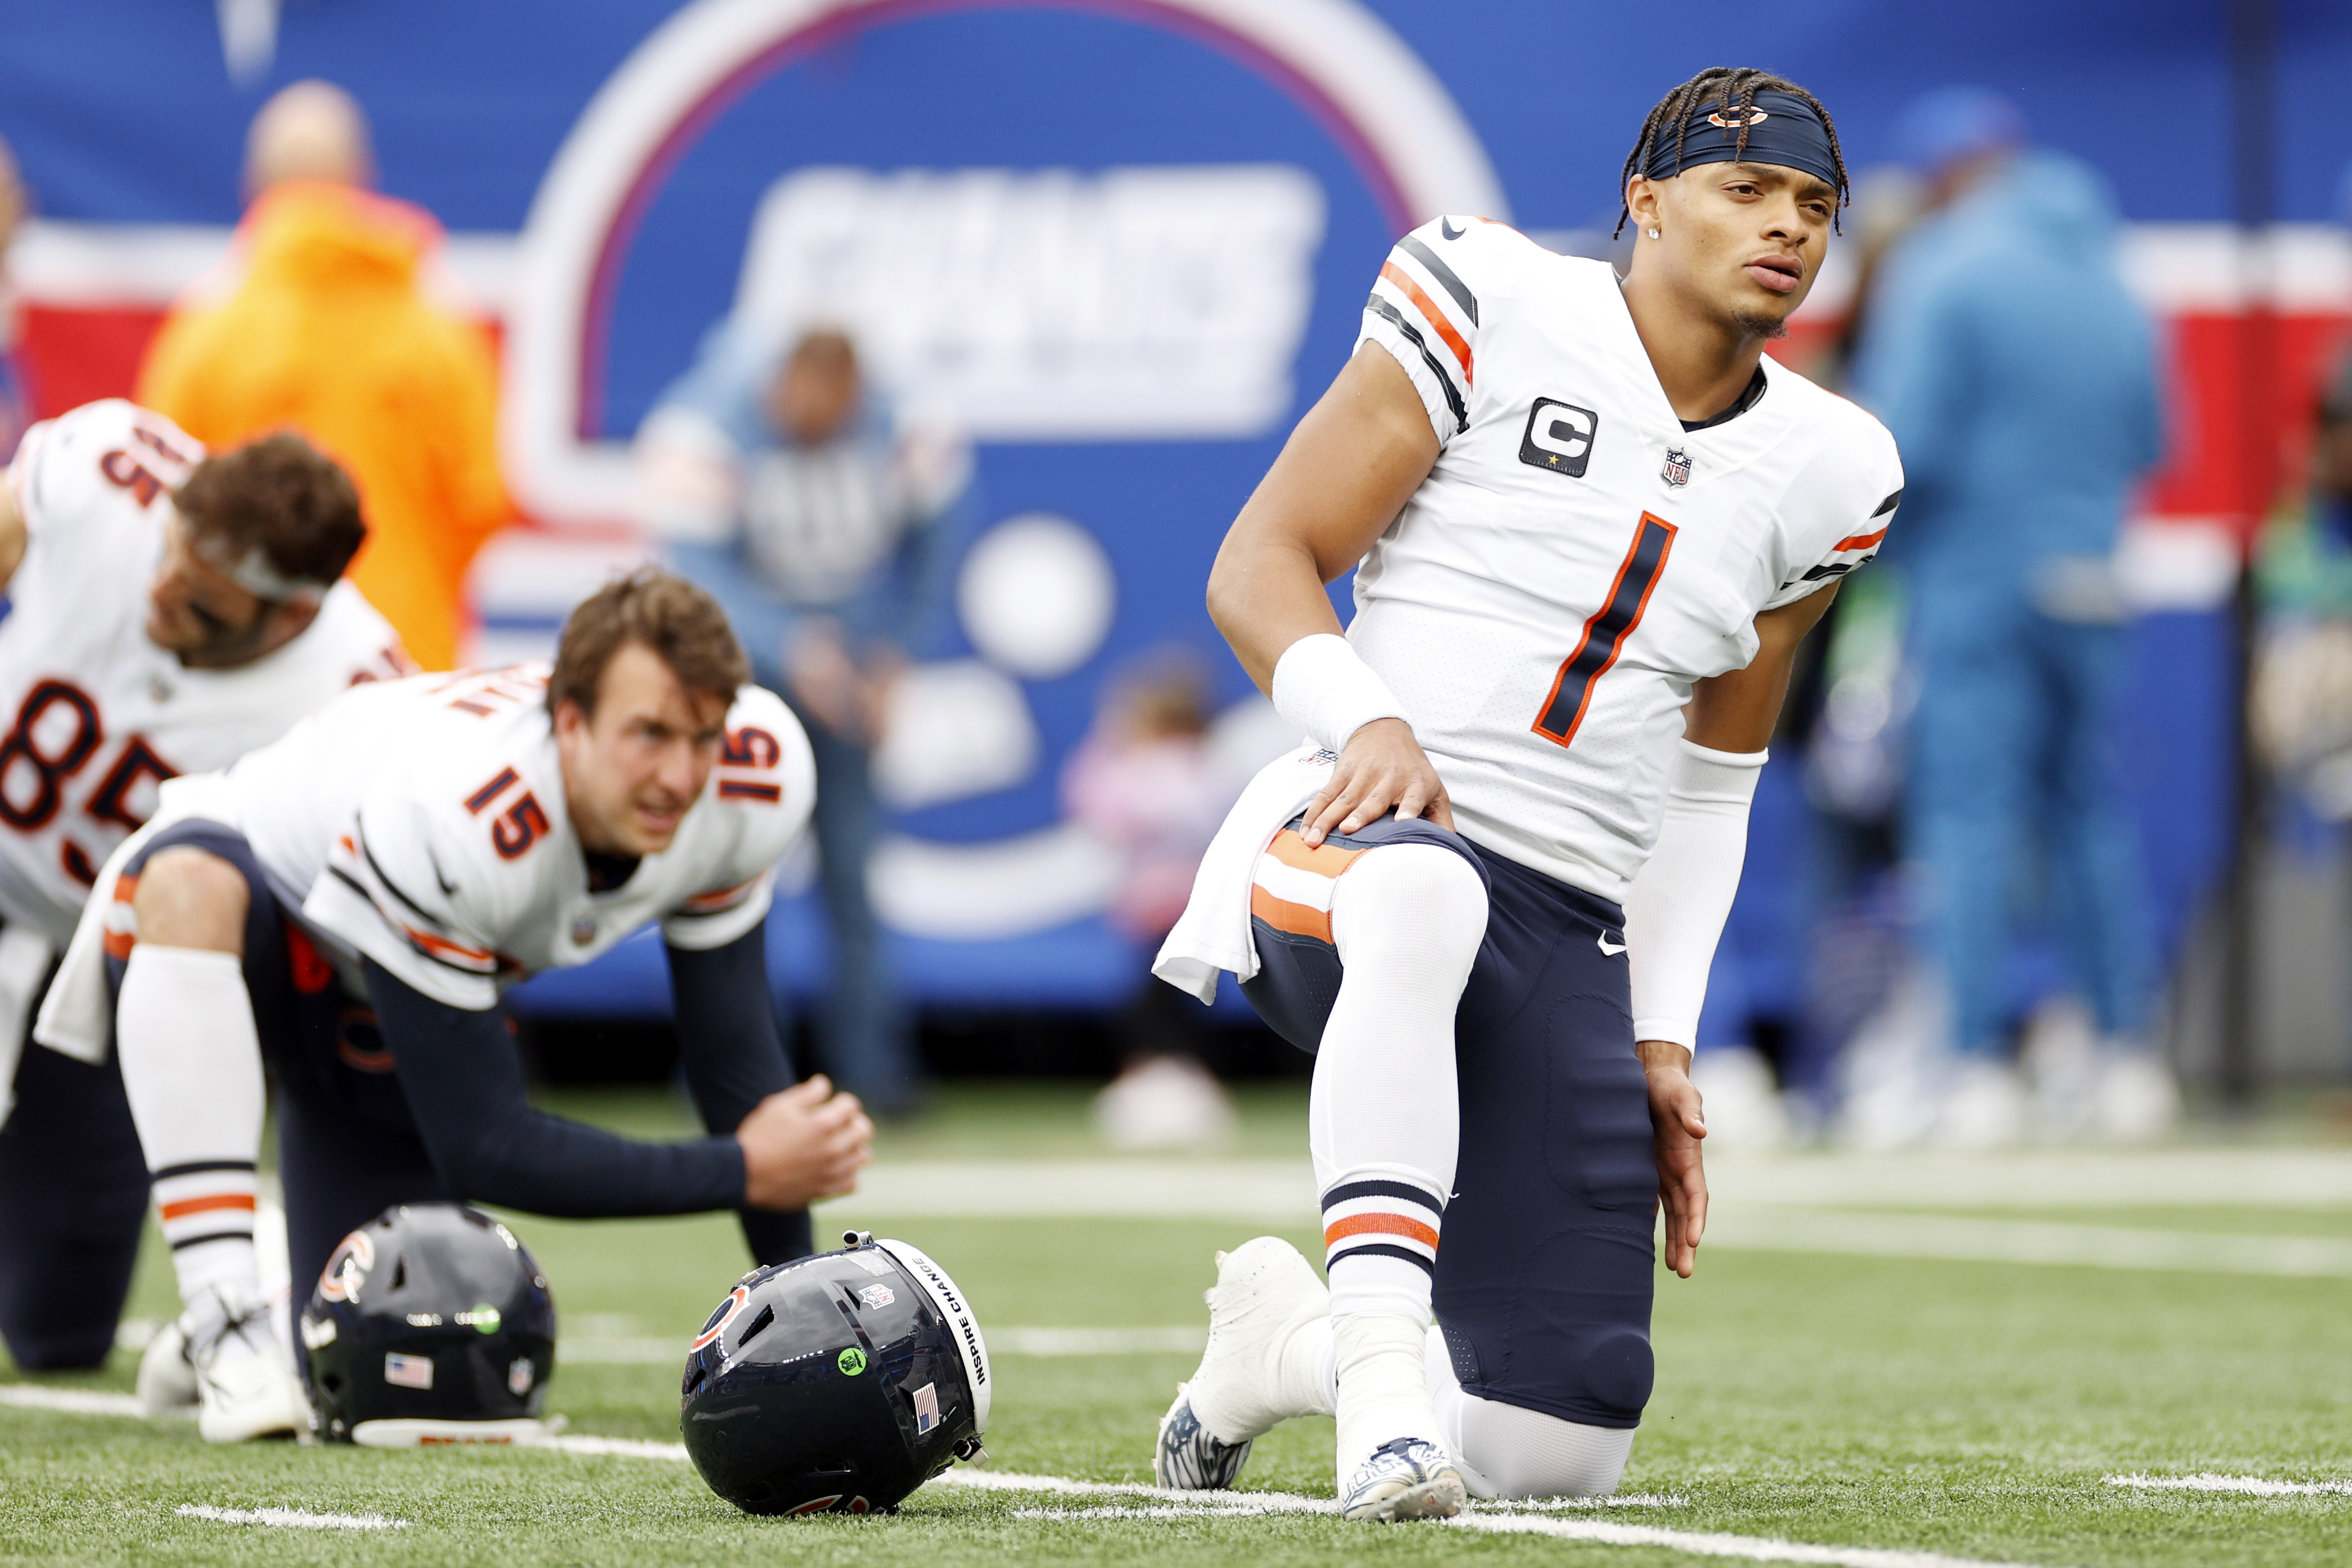 Justin Fields #1 of the Chicago Bears looks on while stretching before the game against the New York Giants at MetLife Stadium on October 02, 2022 in East Rutherford, New Jersey.